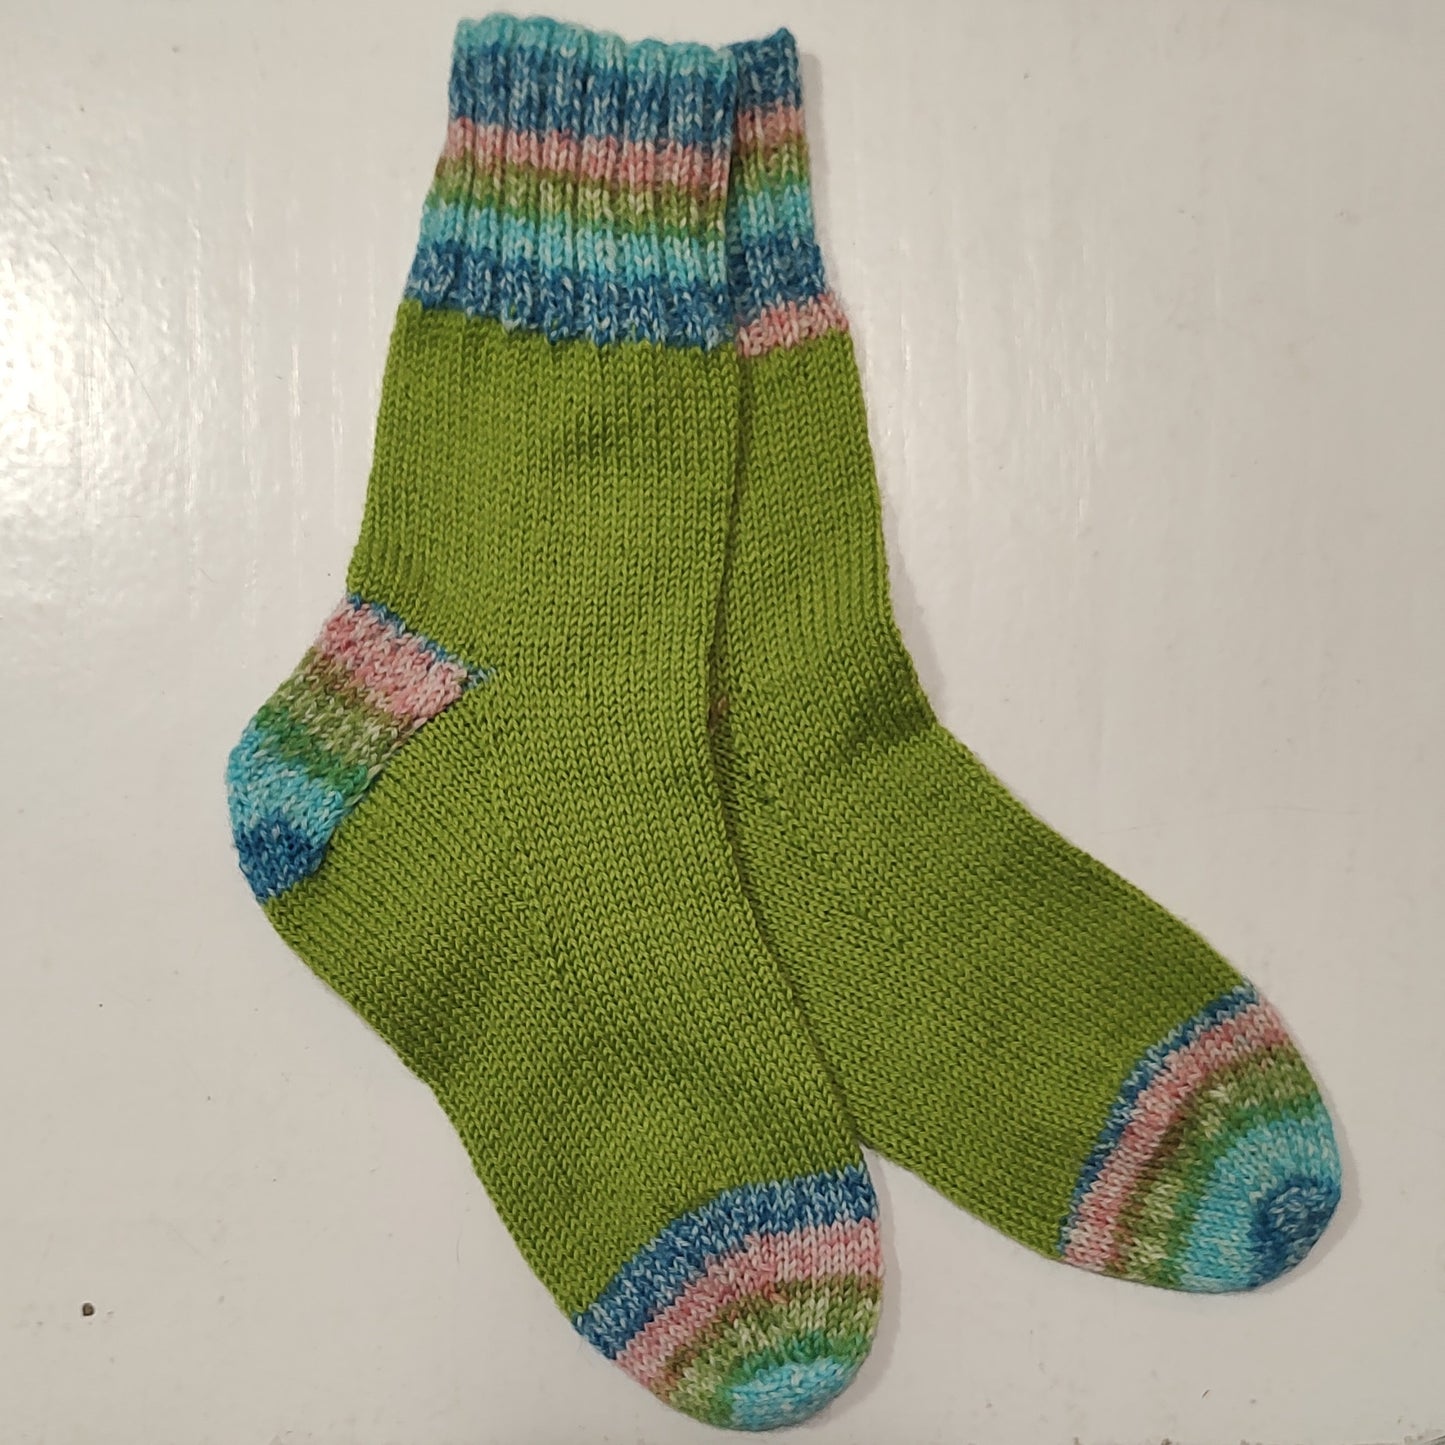 Knitted Socks - approximately size 6-7